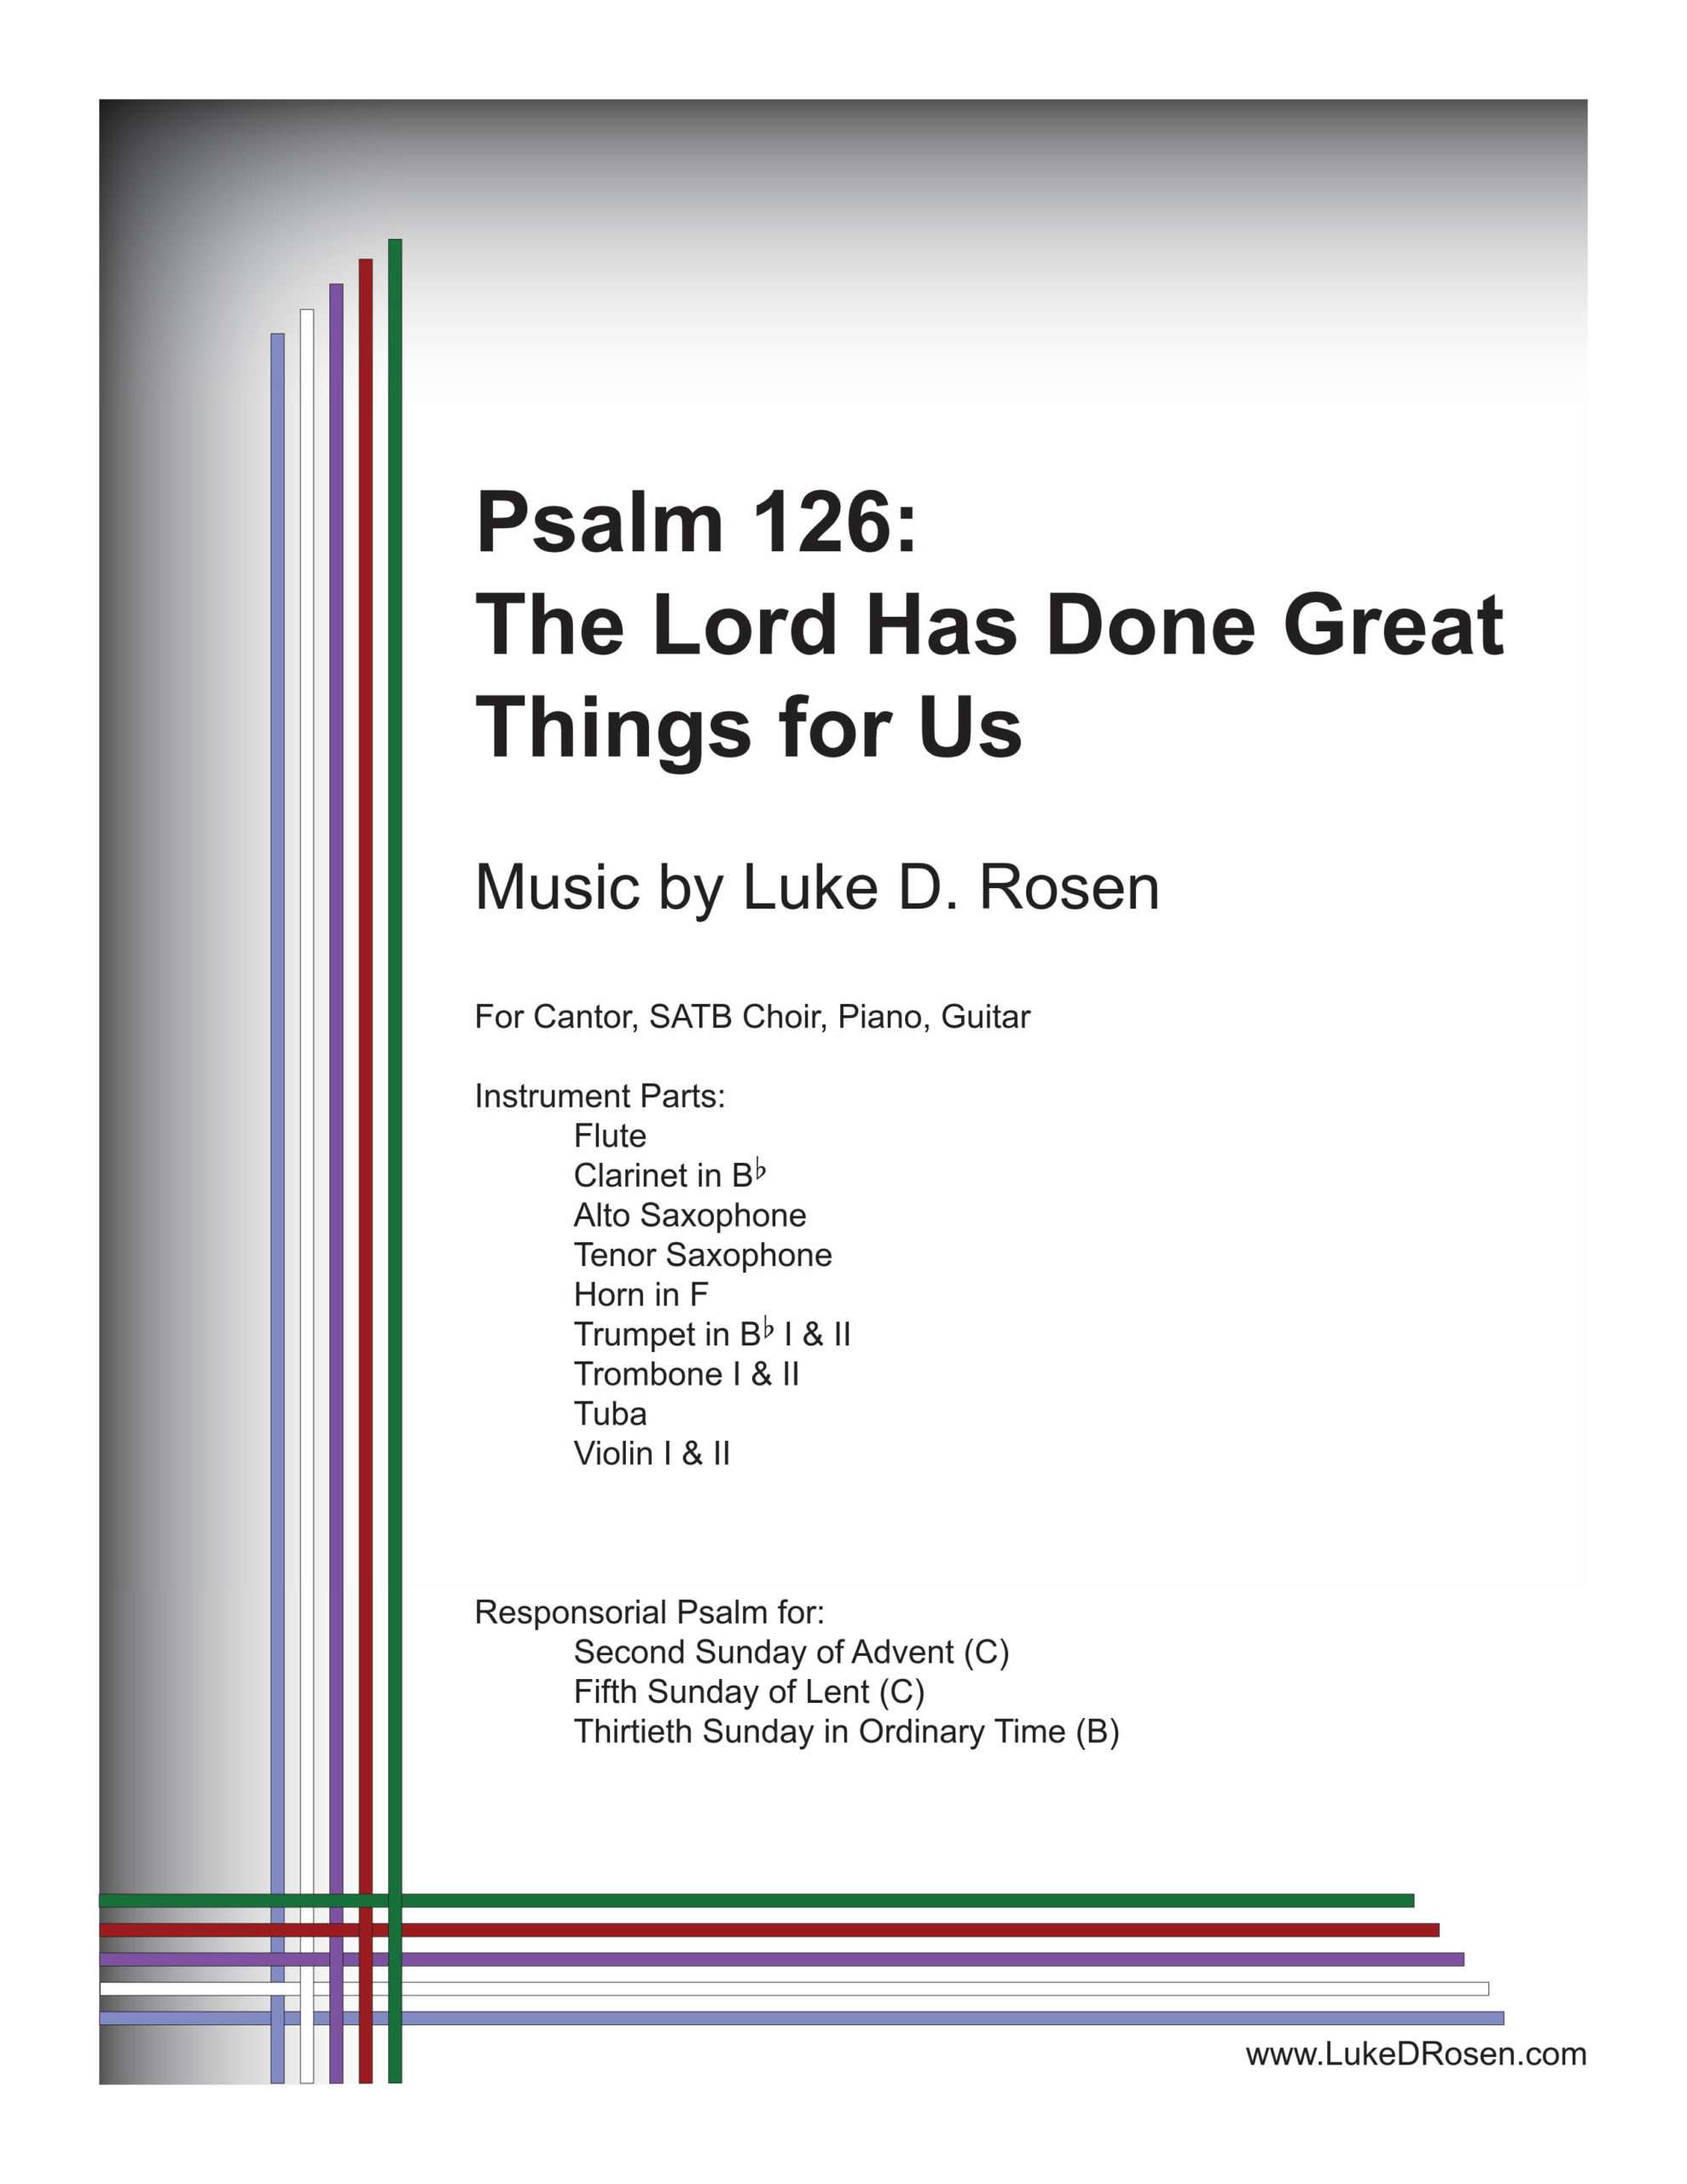 Psalm 126 – The Lord Has Done Great Things for Us (Rosen)